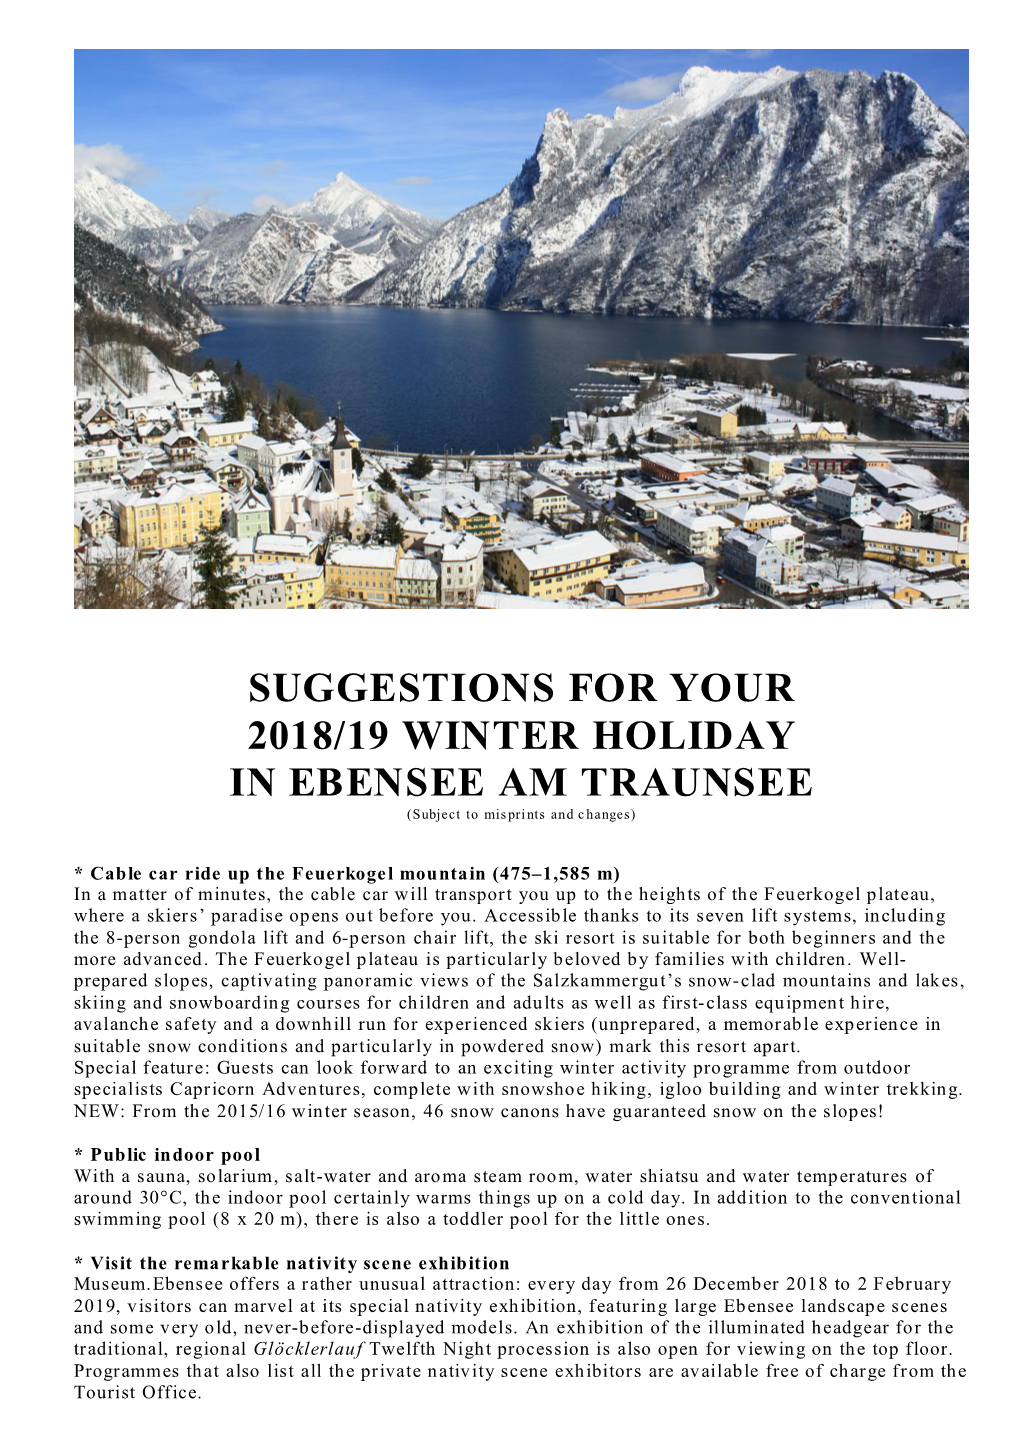 SUGGESTIONS for YOUR 2018/19 WINTER HOLIDAY in EBENSEE AM TRAUNSEE (Subject to Misprints and Changes)